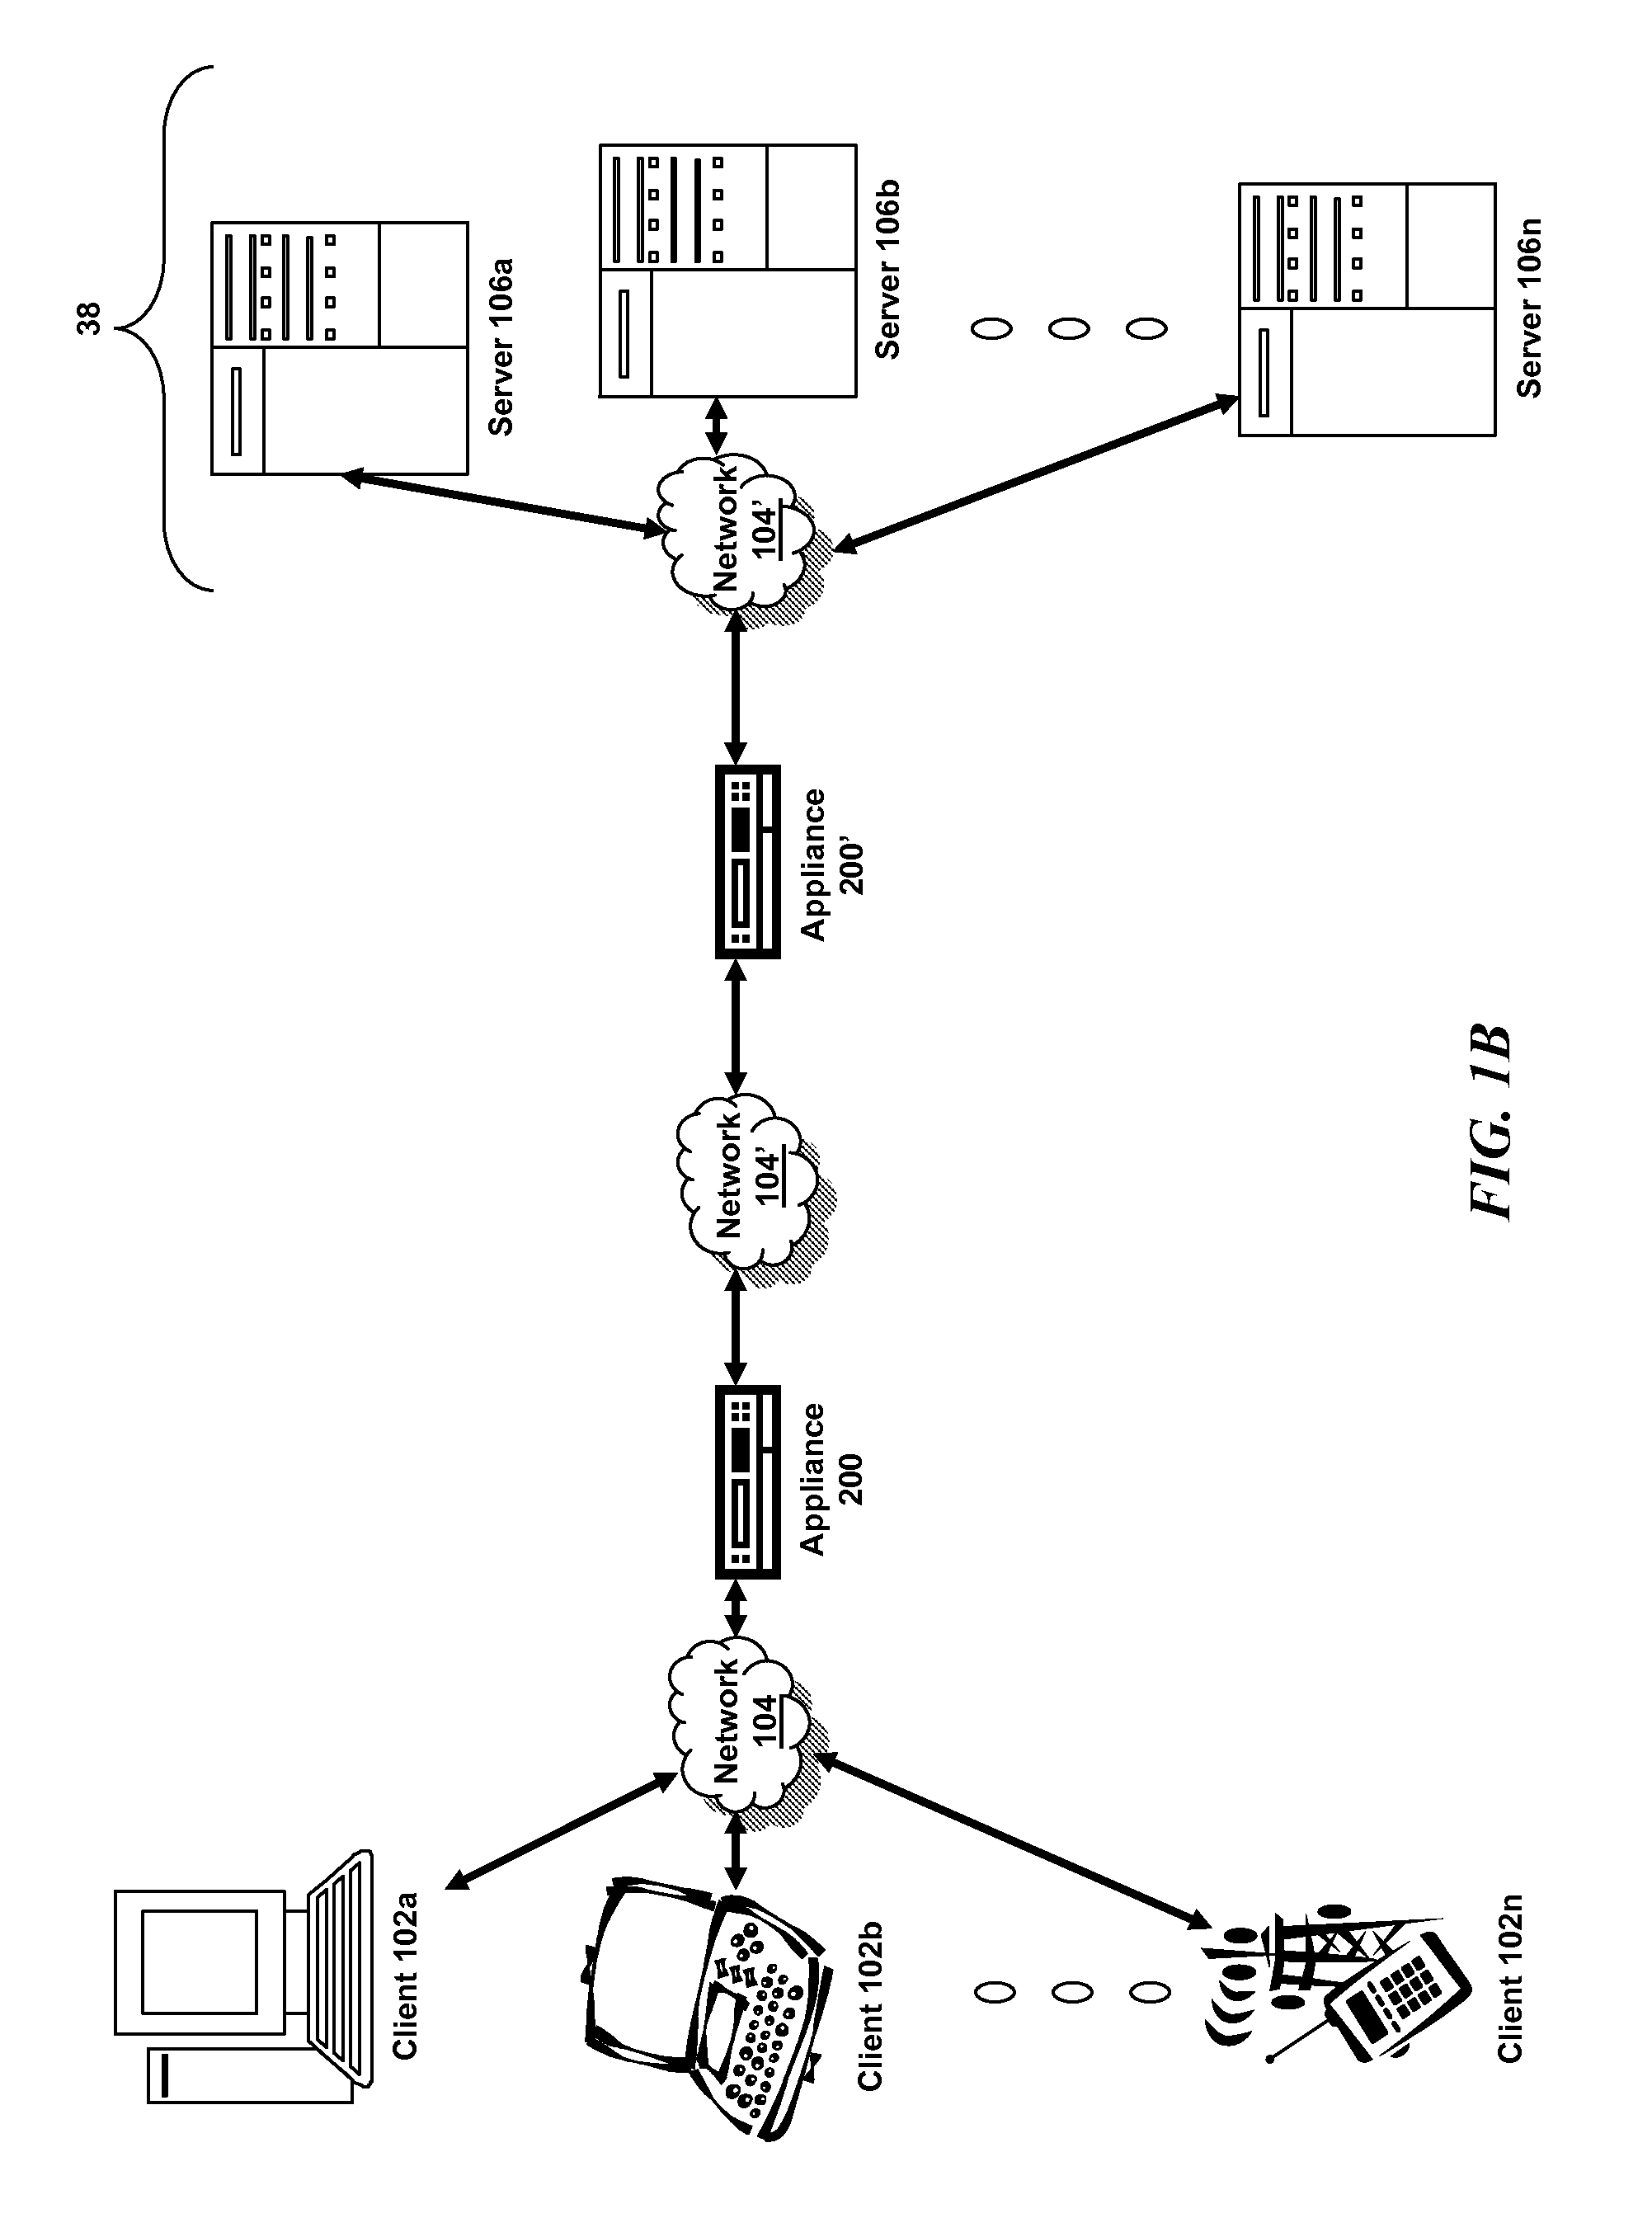 Systems and methods for receive and transmission queue processing in a multi-core architecture